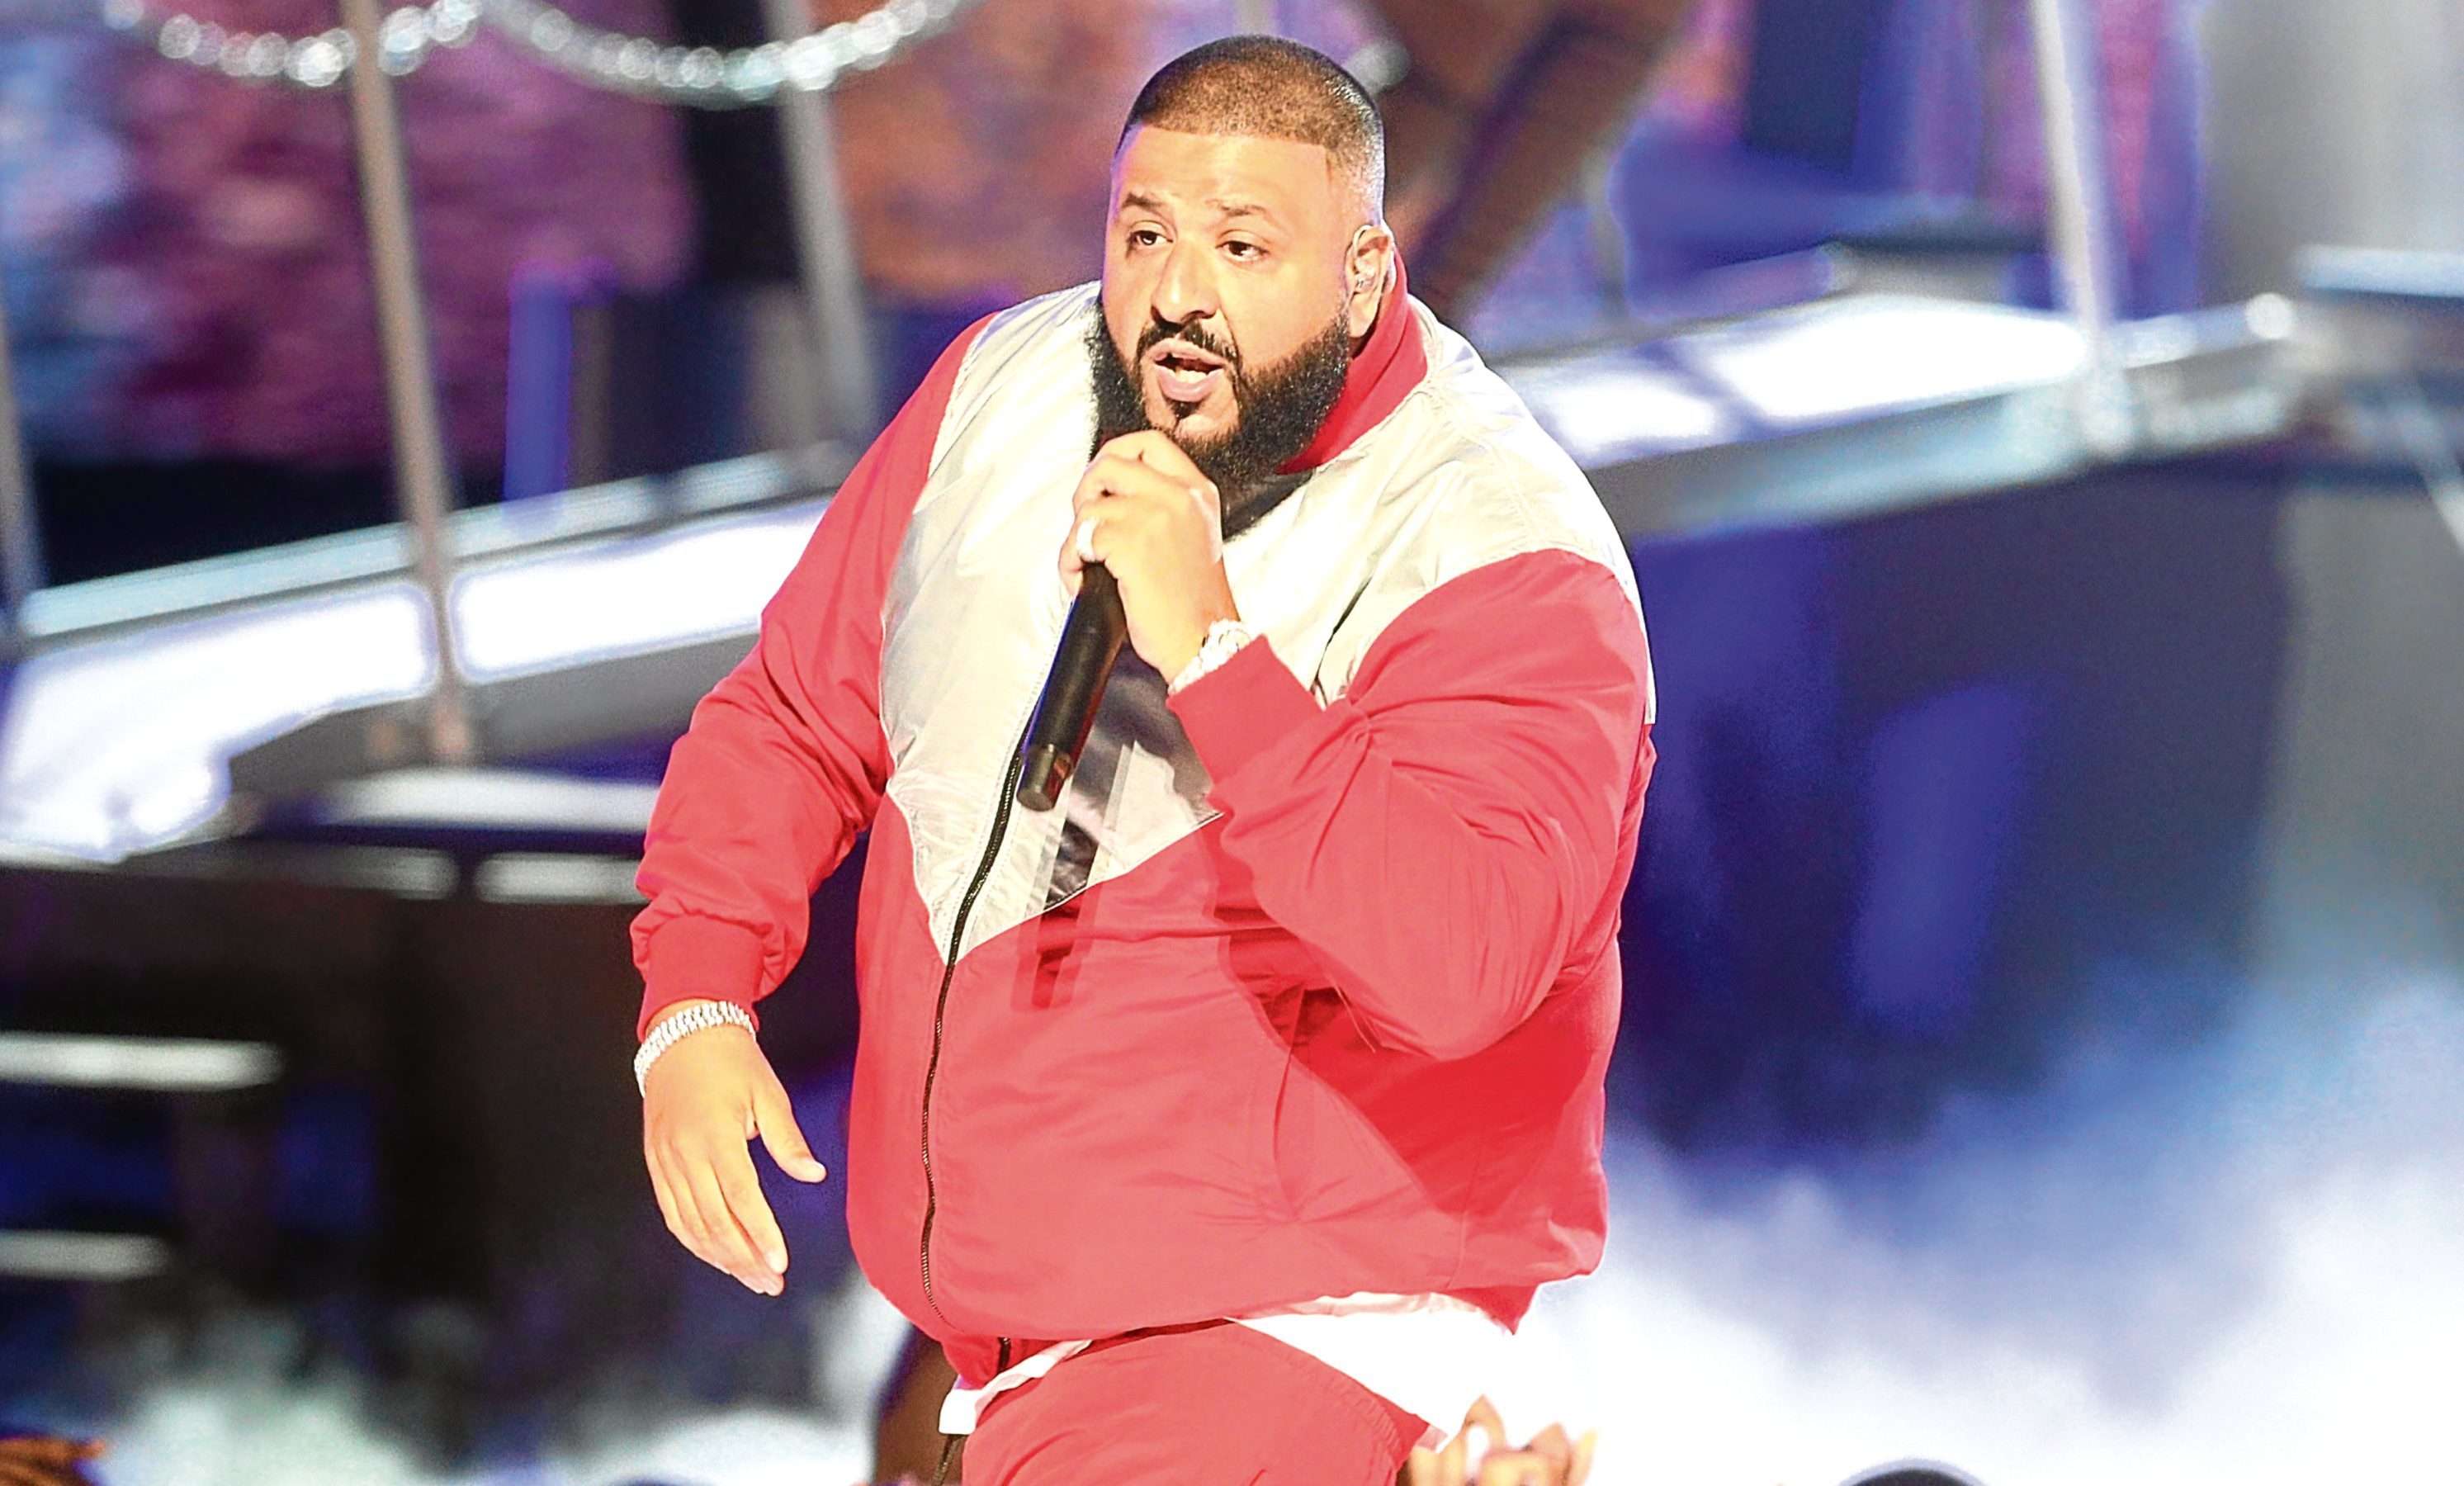 DJ Khalid onstage at 2017 BET Awards at Microsoft Theater on June 25, 2017 in Los Angeles, California.